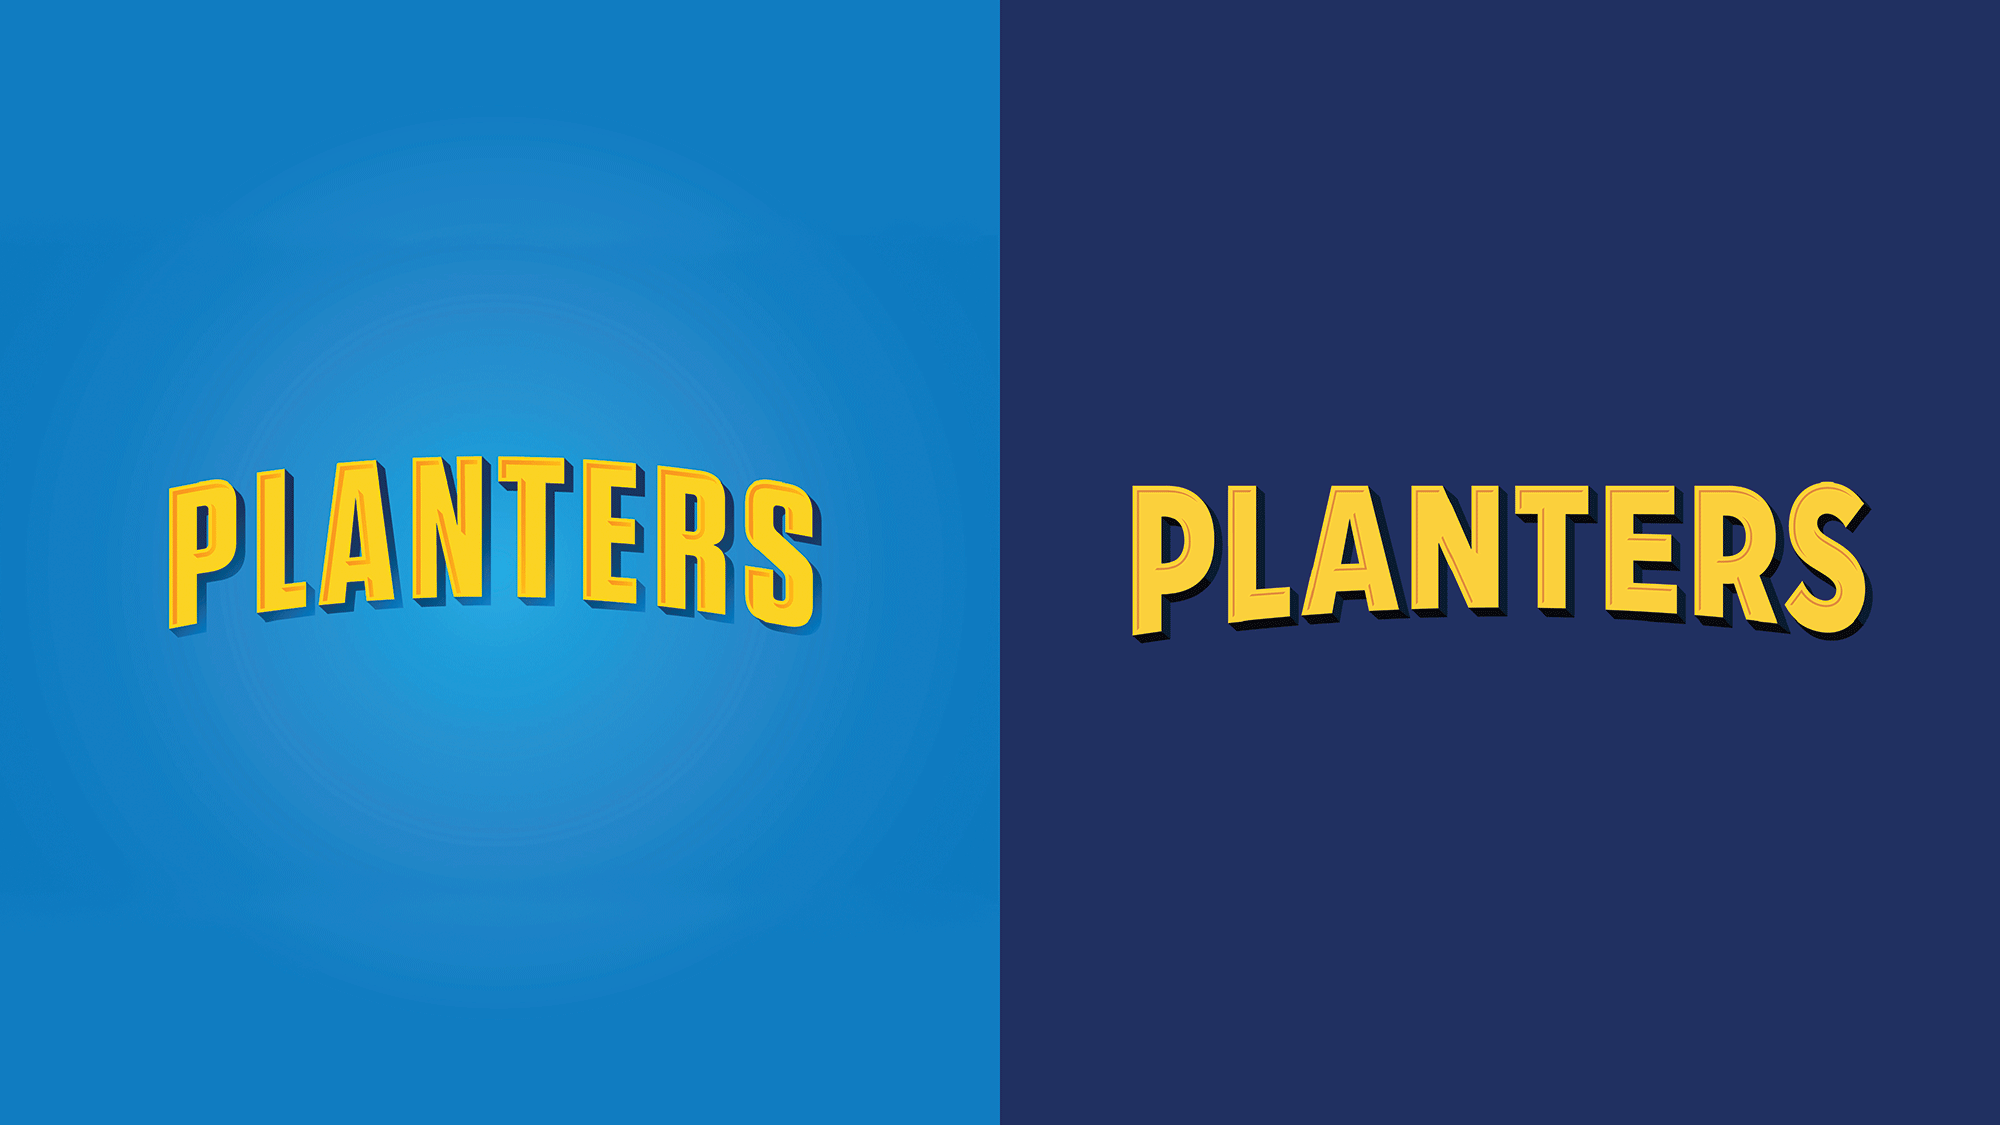 New Logo, Identity, and Packaging for Planters by Jones Knowles Ritchie